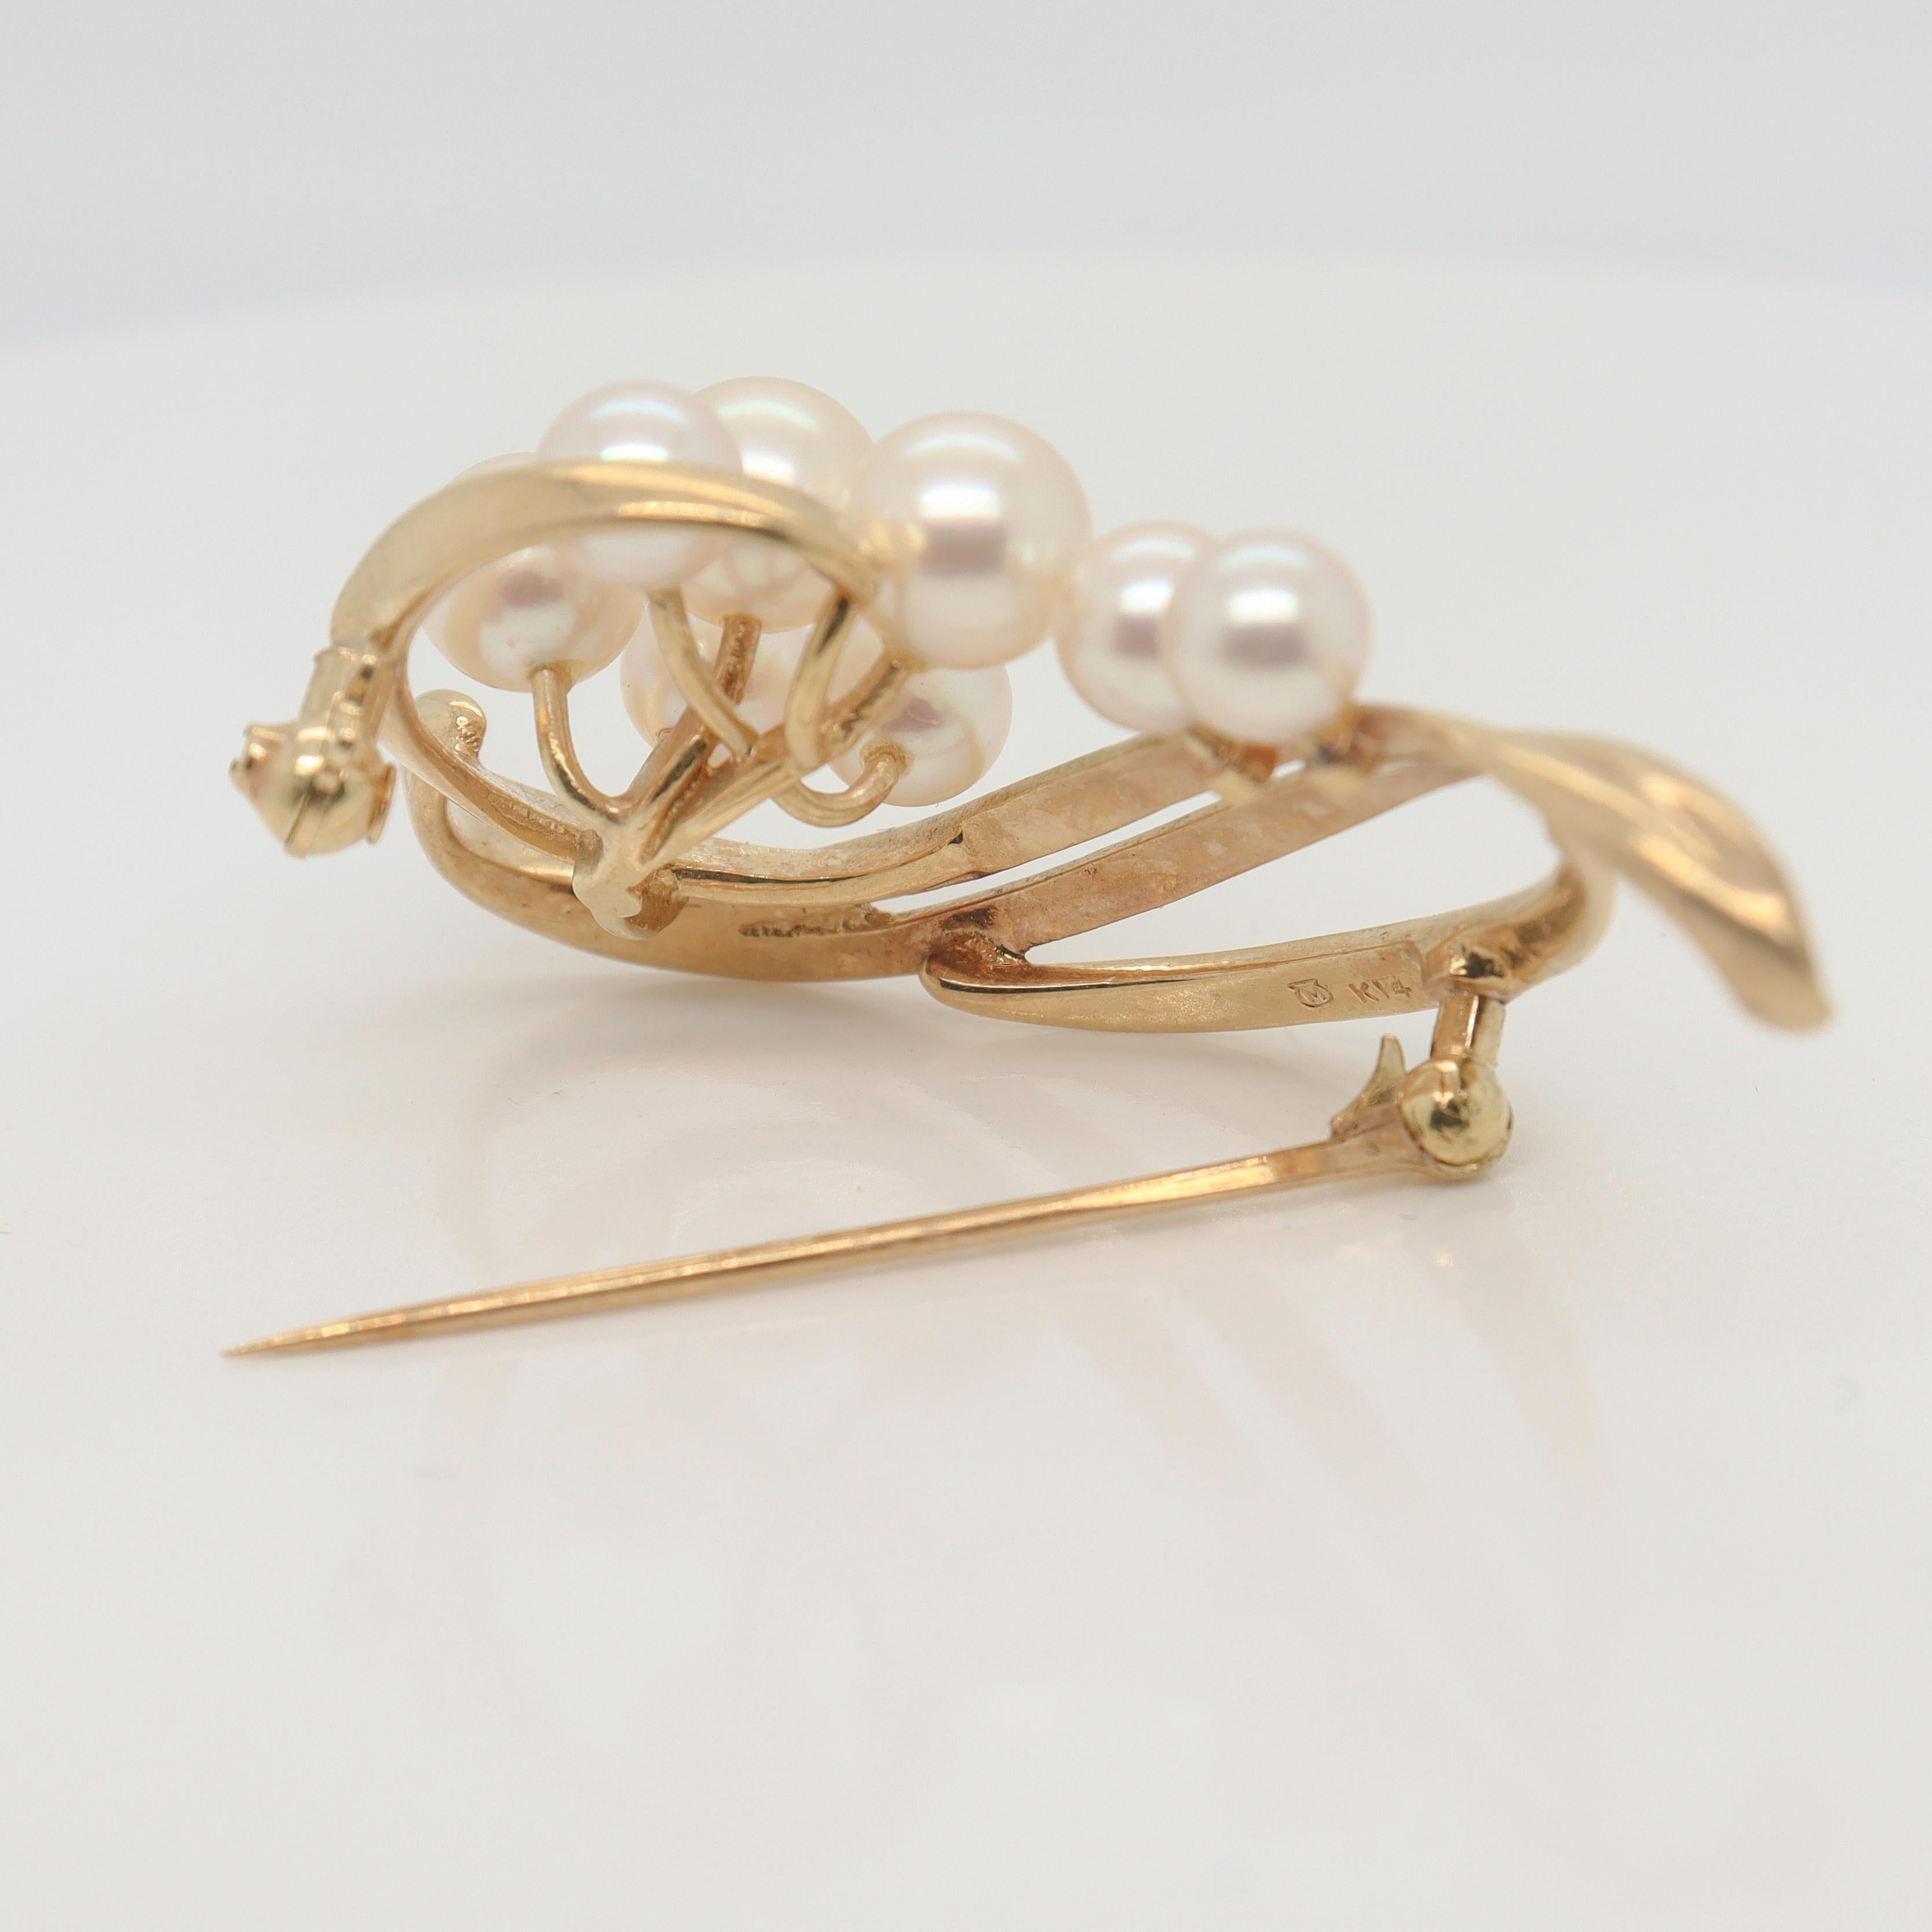 Mikimoto Modernist 14k Gold & Akoya Pearl Brooch or Pin For Sale 6